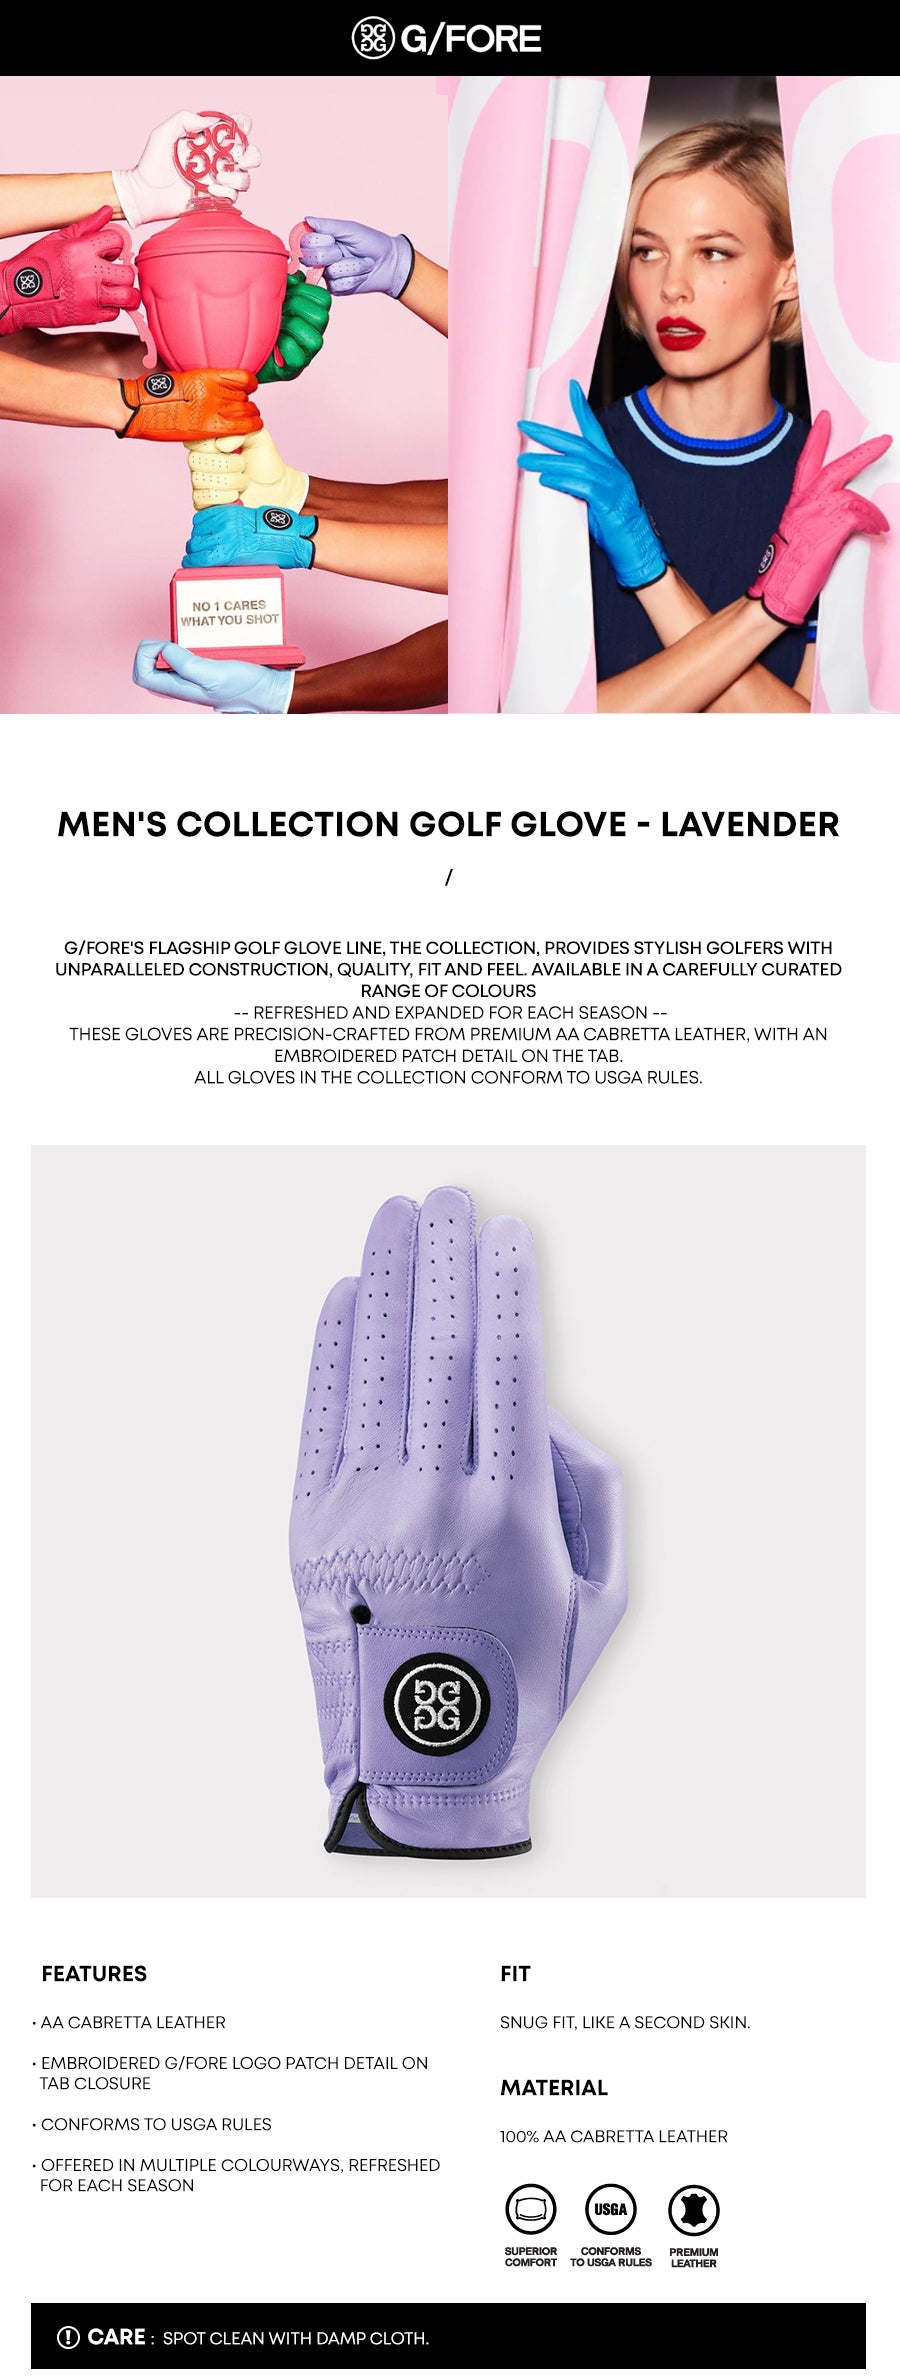 G/FORE-MEN'S-COLLECTION-GOLF-GLOVE-LAVENDER